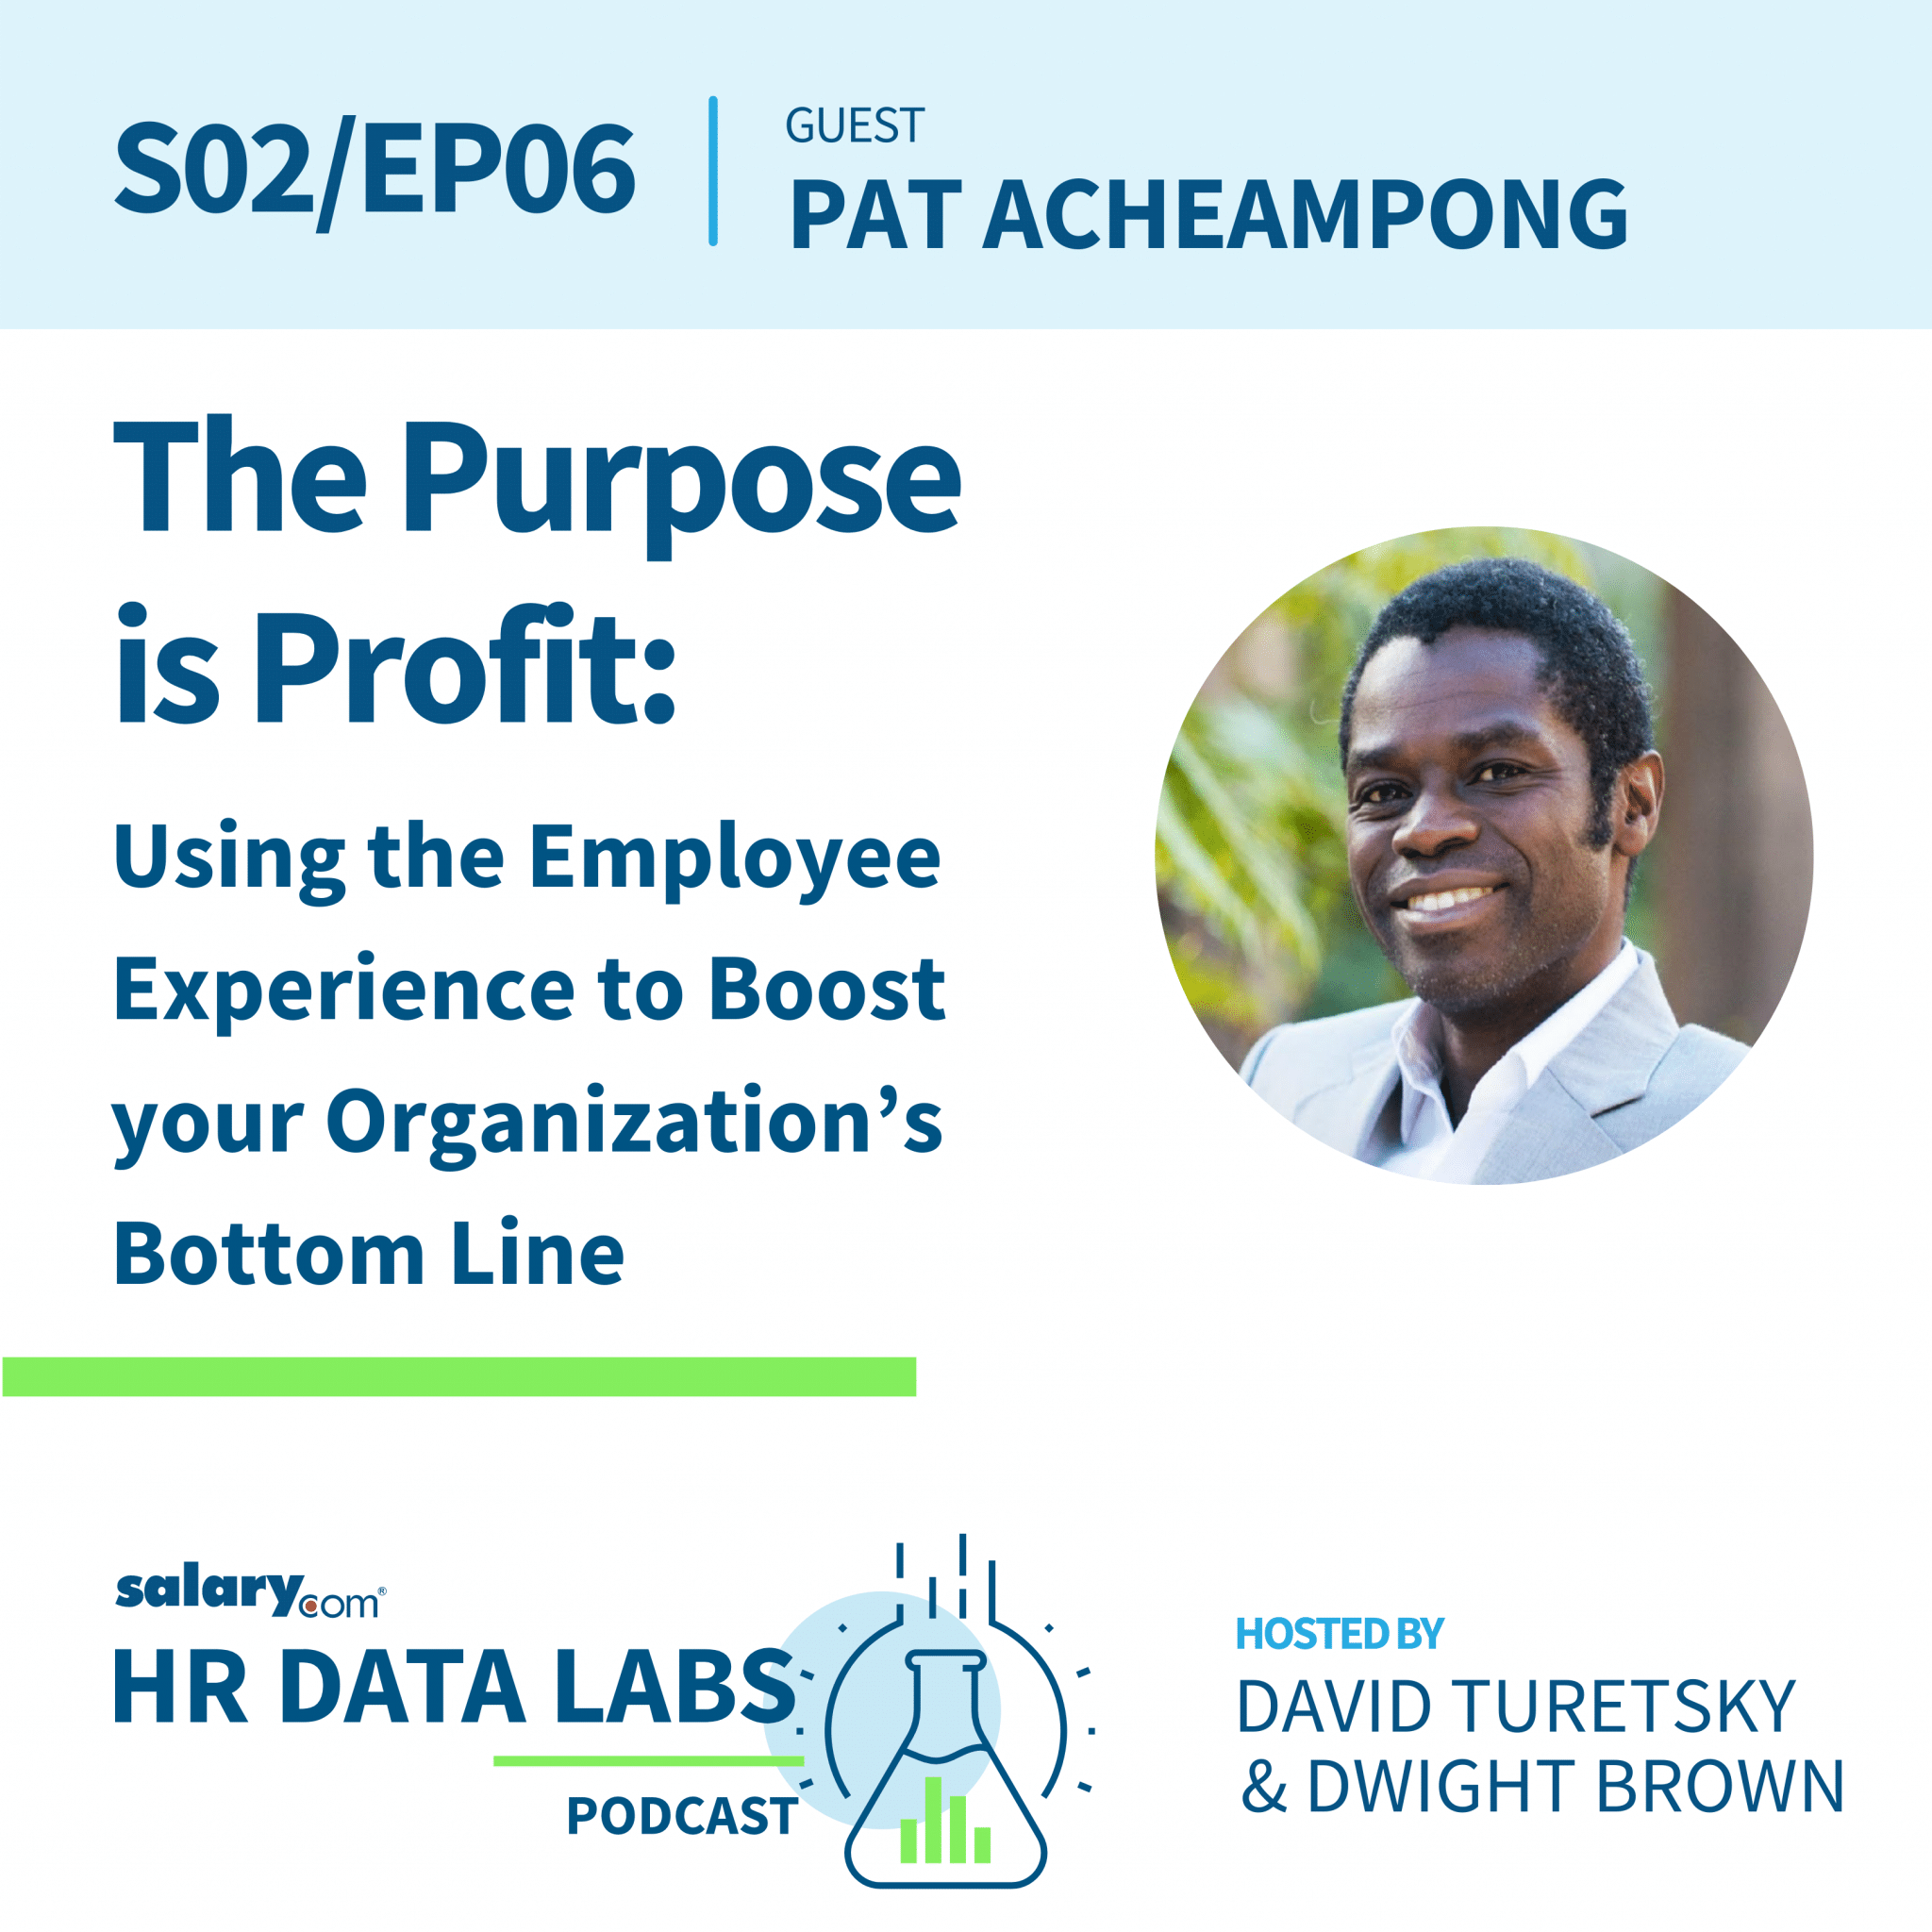 The Purpose is Profit: Using the Employee Experience to Boost your Organization’s Bottom Line